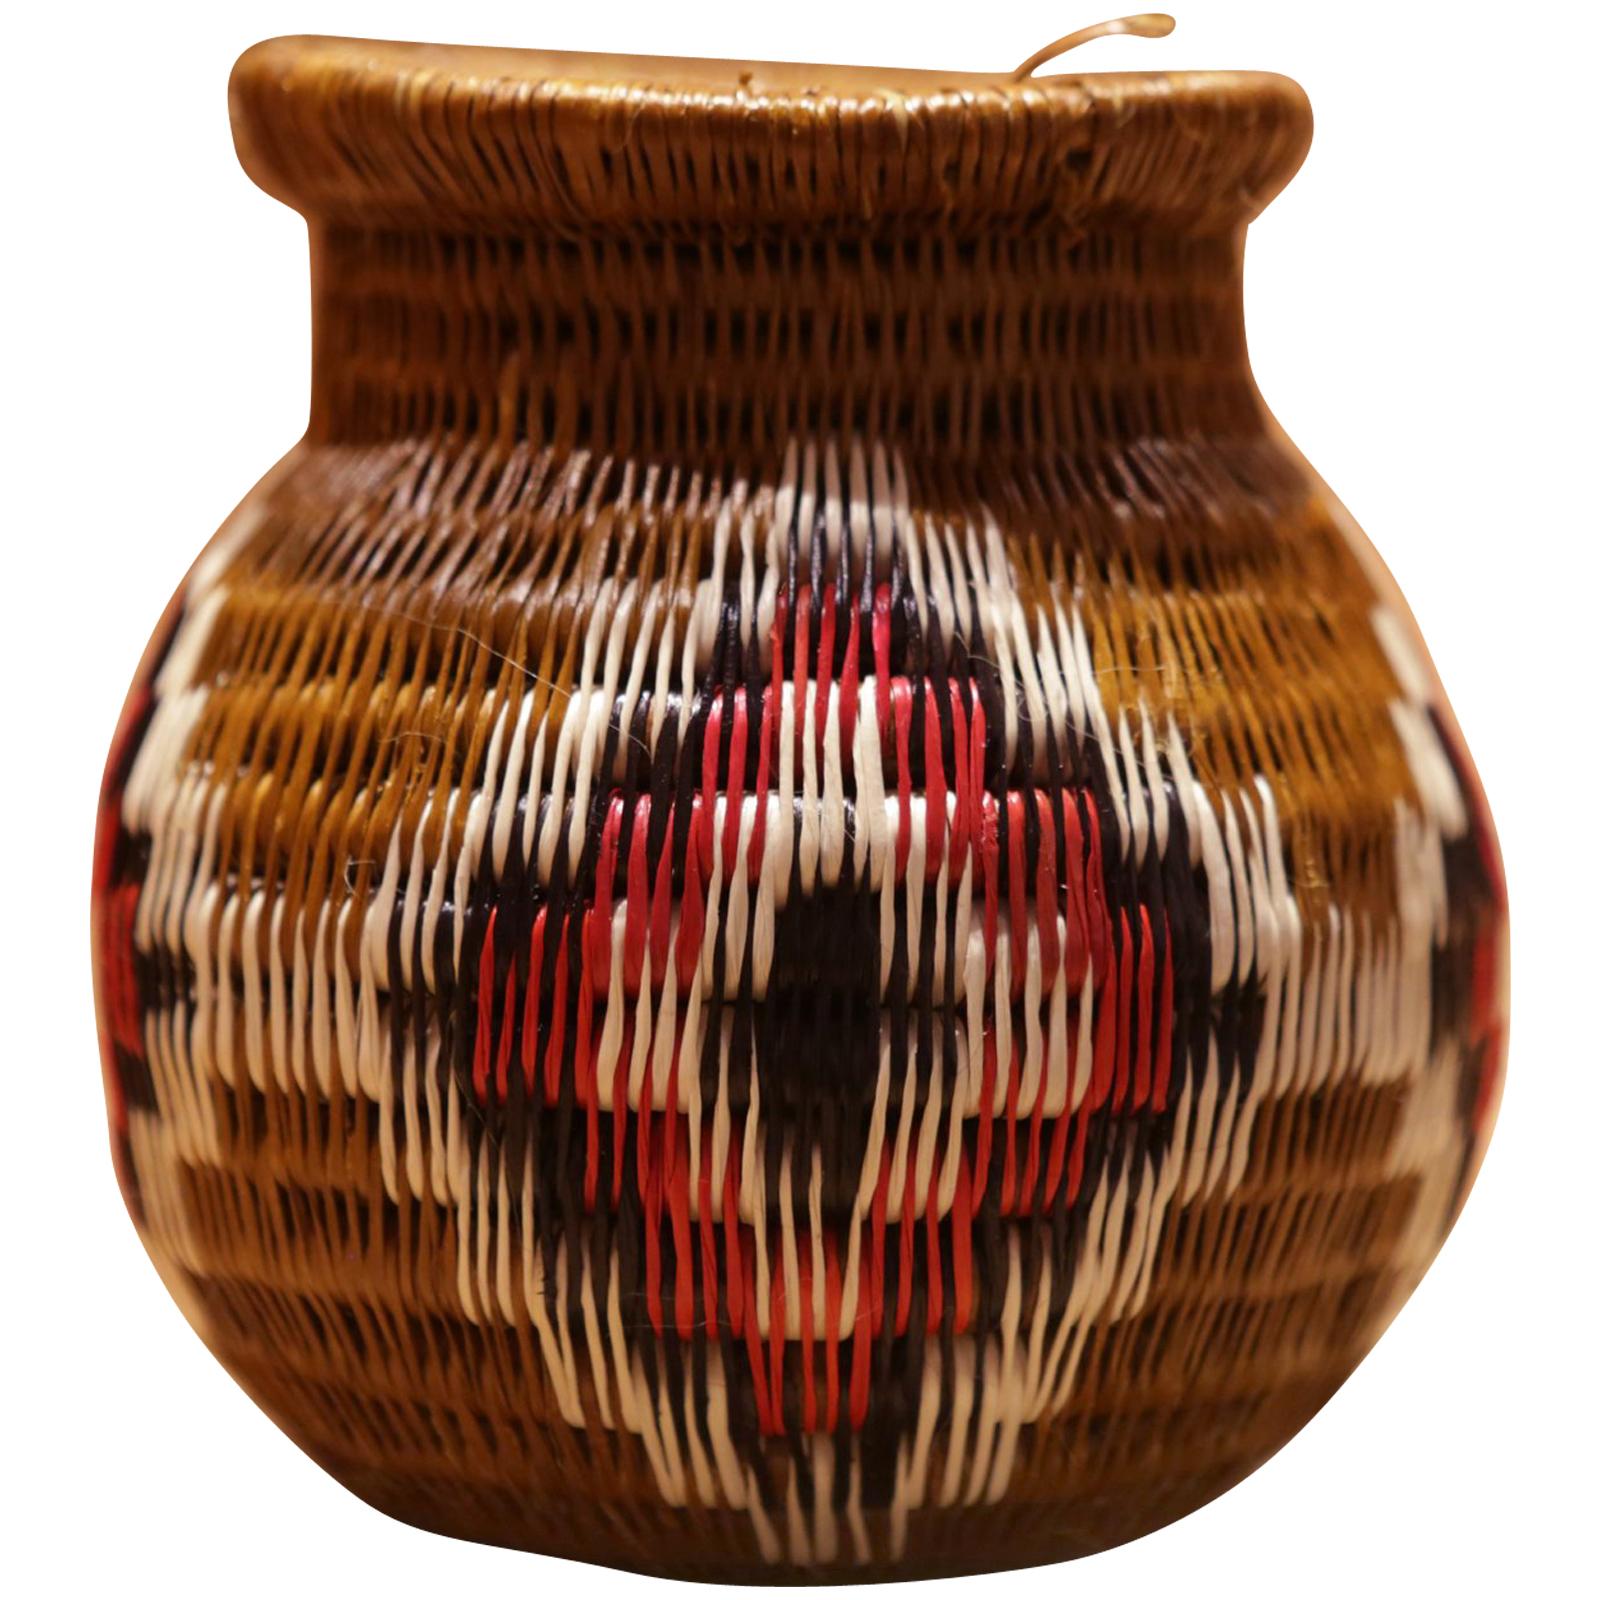 Colombian D Vase Hand-Braided